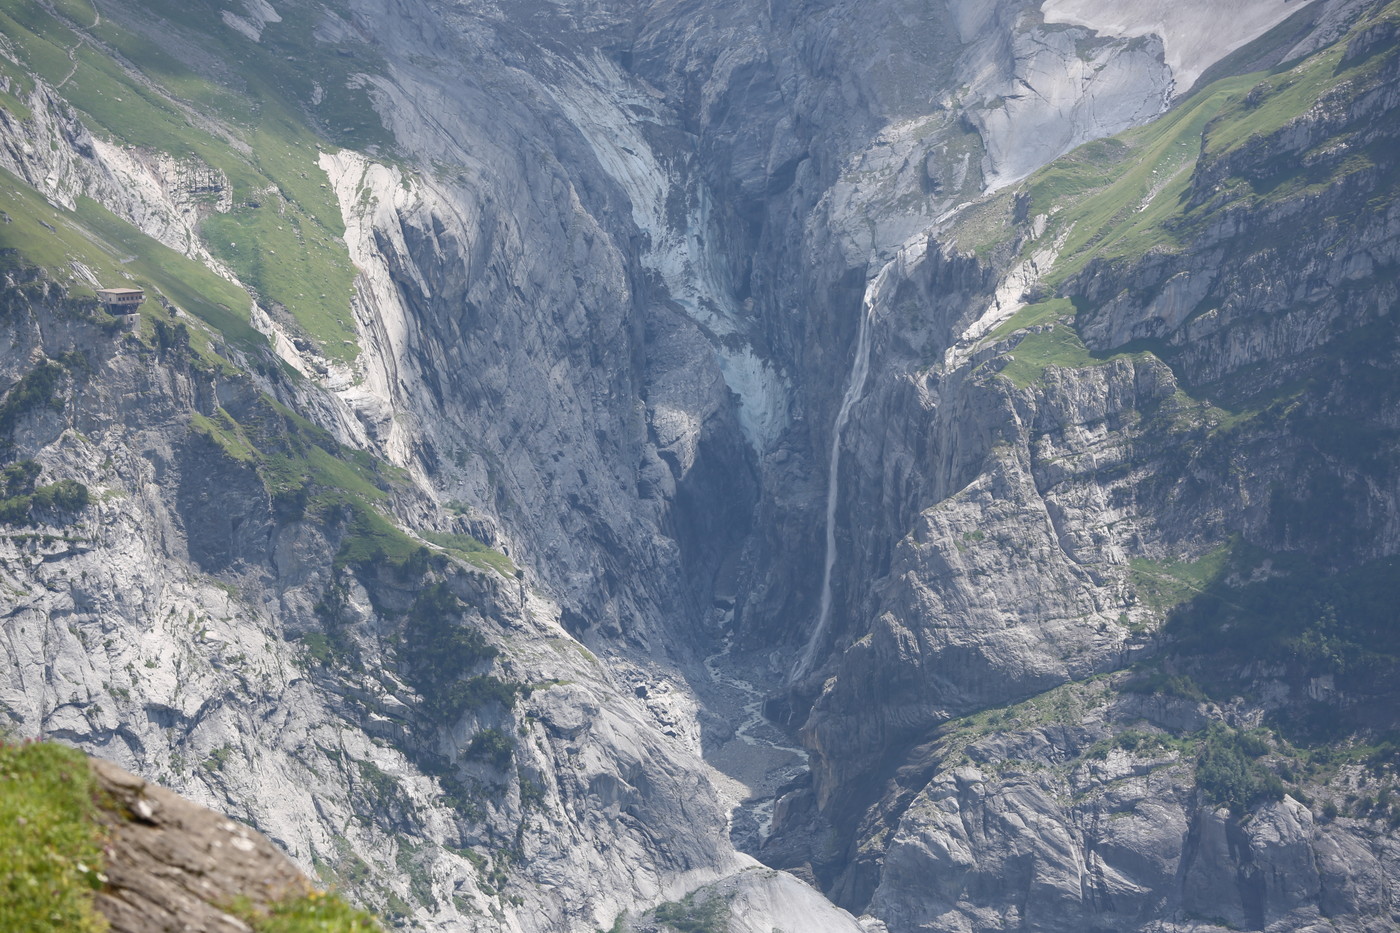 Tongue of the Oberer Grindelwaldgletscher in 2019